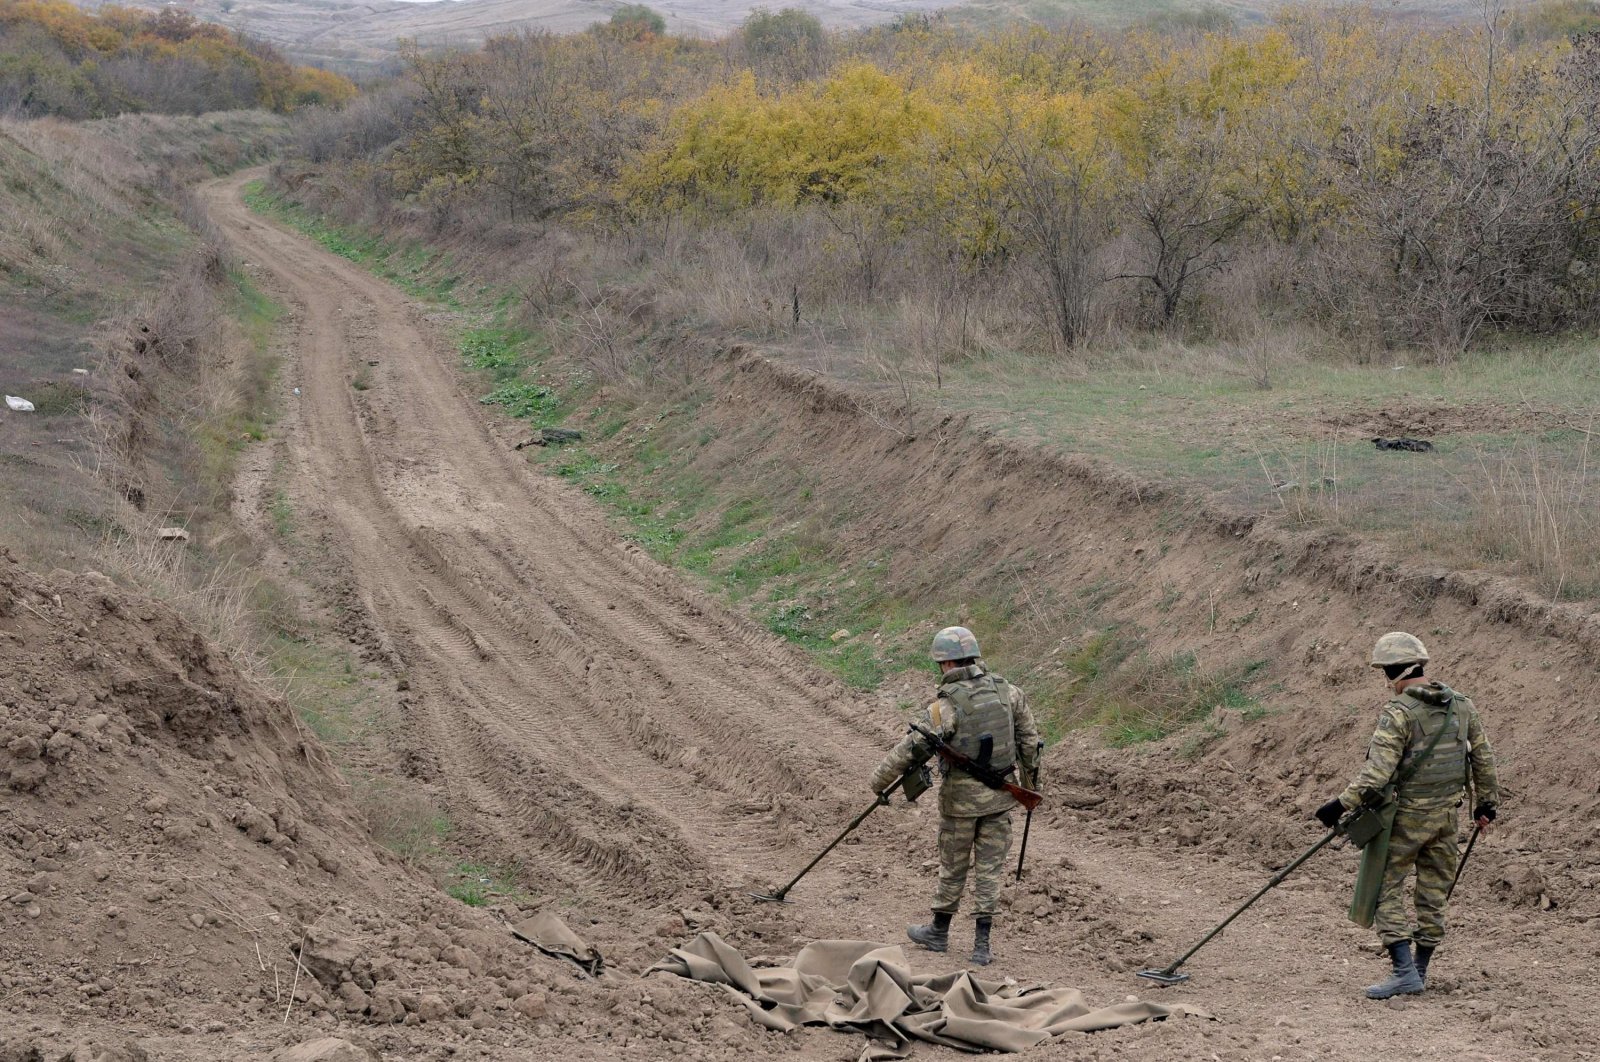 Azerbaijan military sappers clear mines in the countryside outside the town of Fuzuli, Azerbaijan, Nov. 26, 2020. (AFP File Photo)